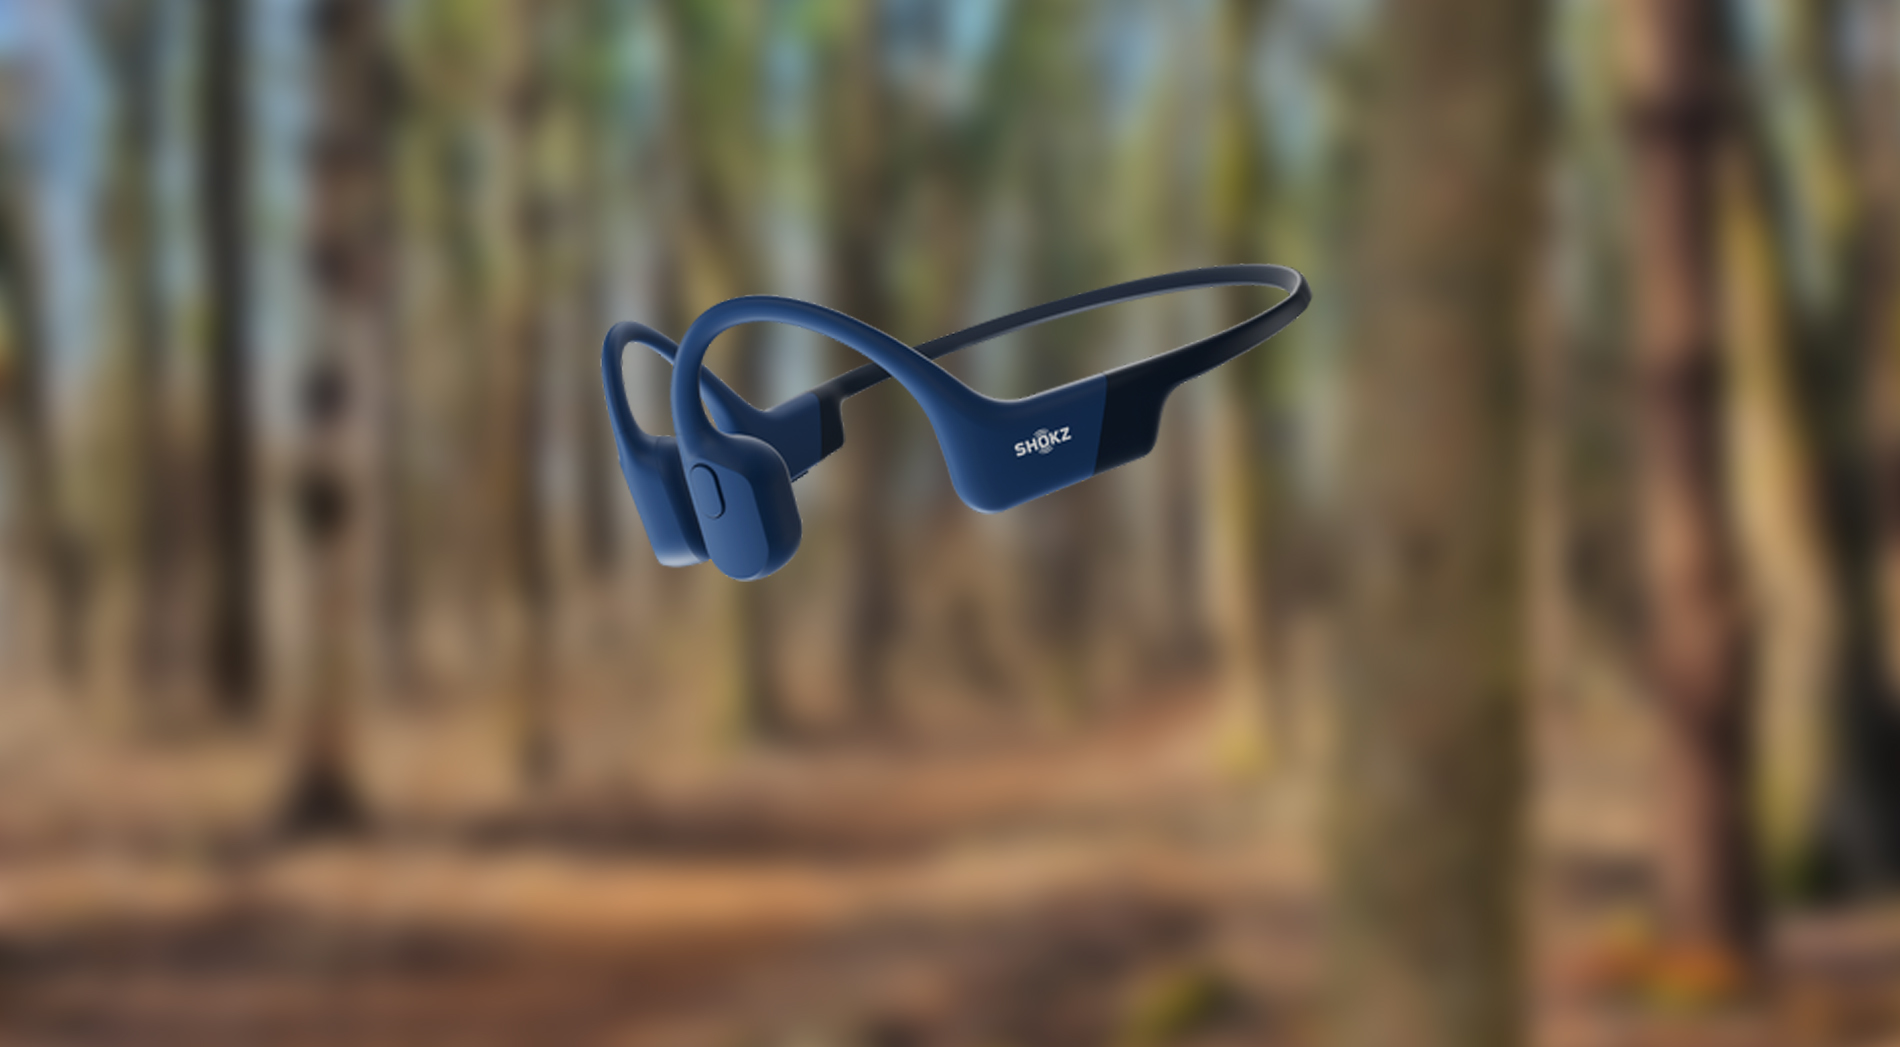 Aftershokz in blue